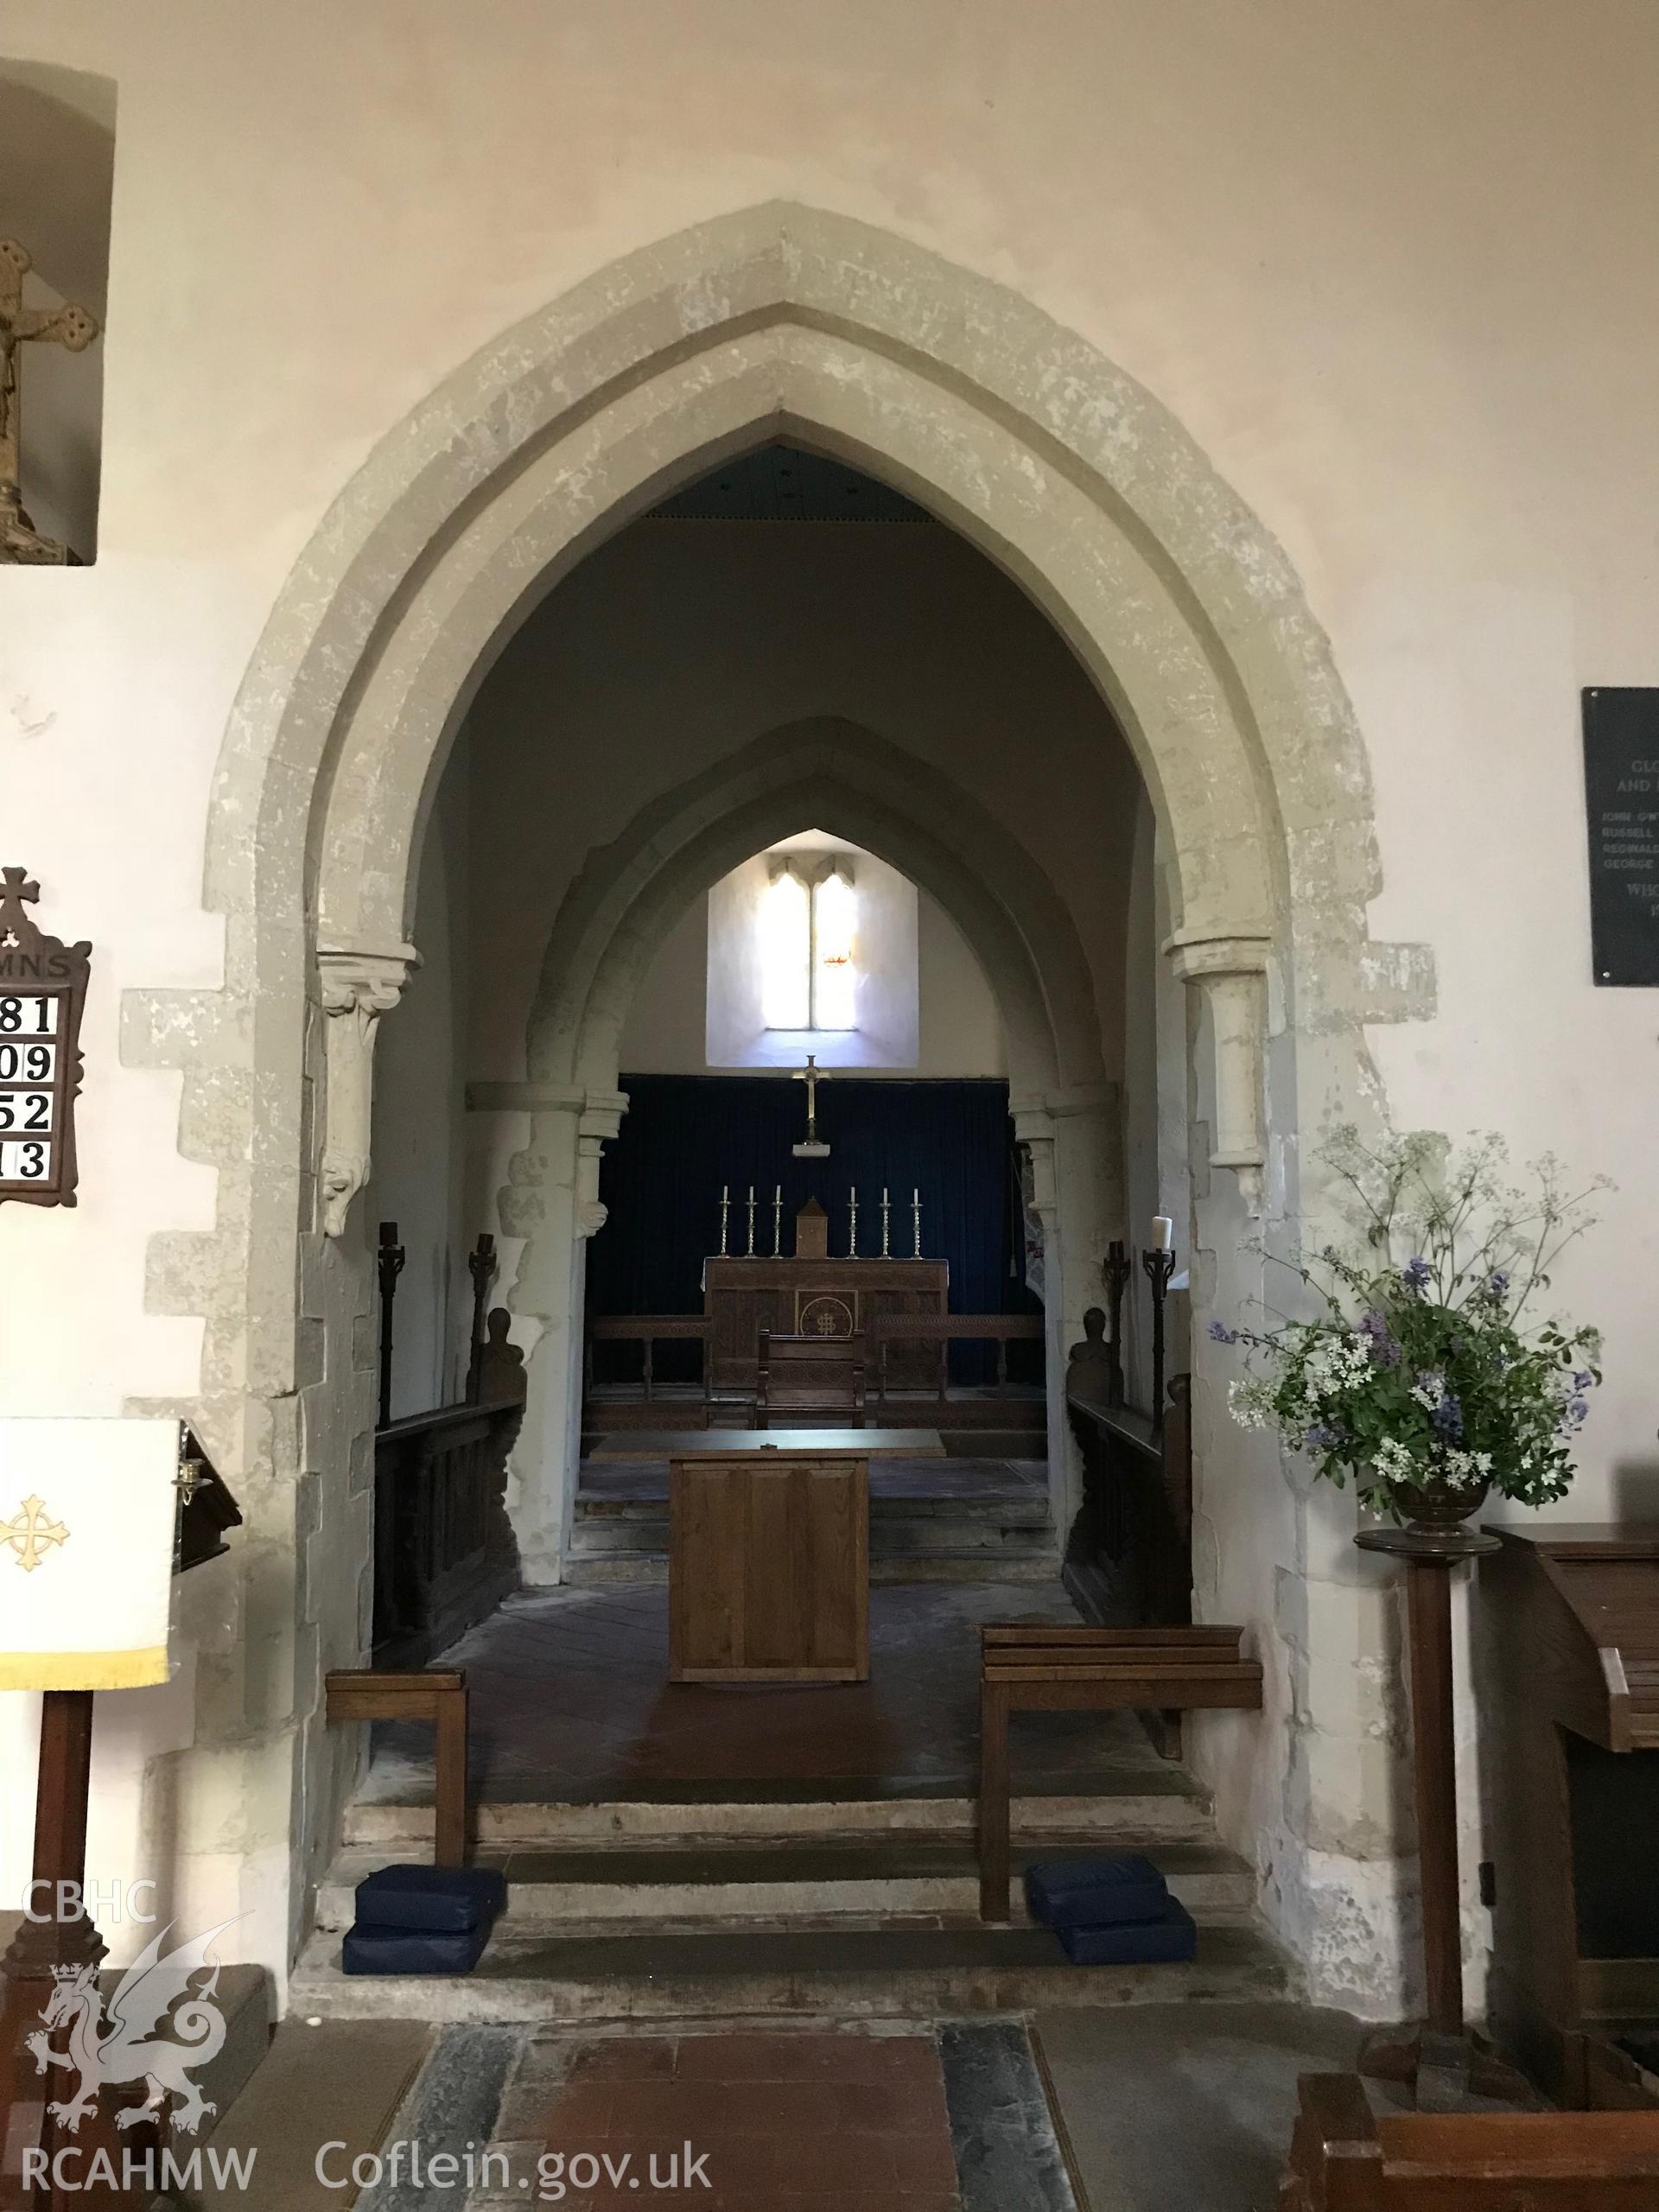 Colour photo showing the interior of St. Cadog's Church, Cheriton, taken by Paul R. Davis, 19th May 2018.